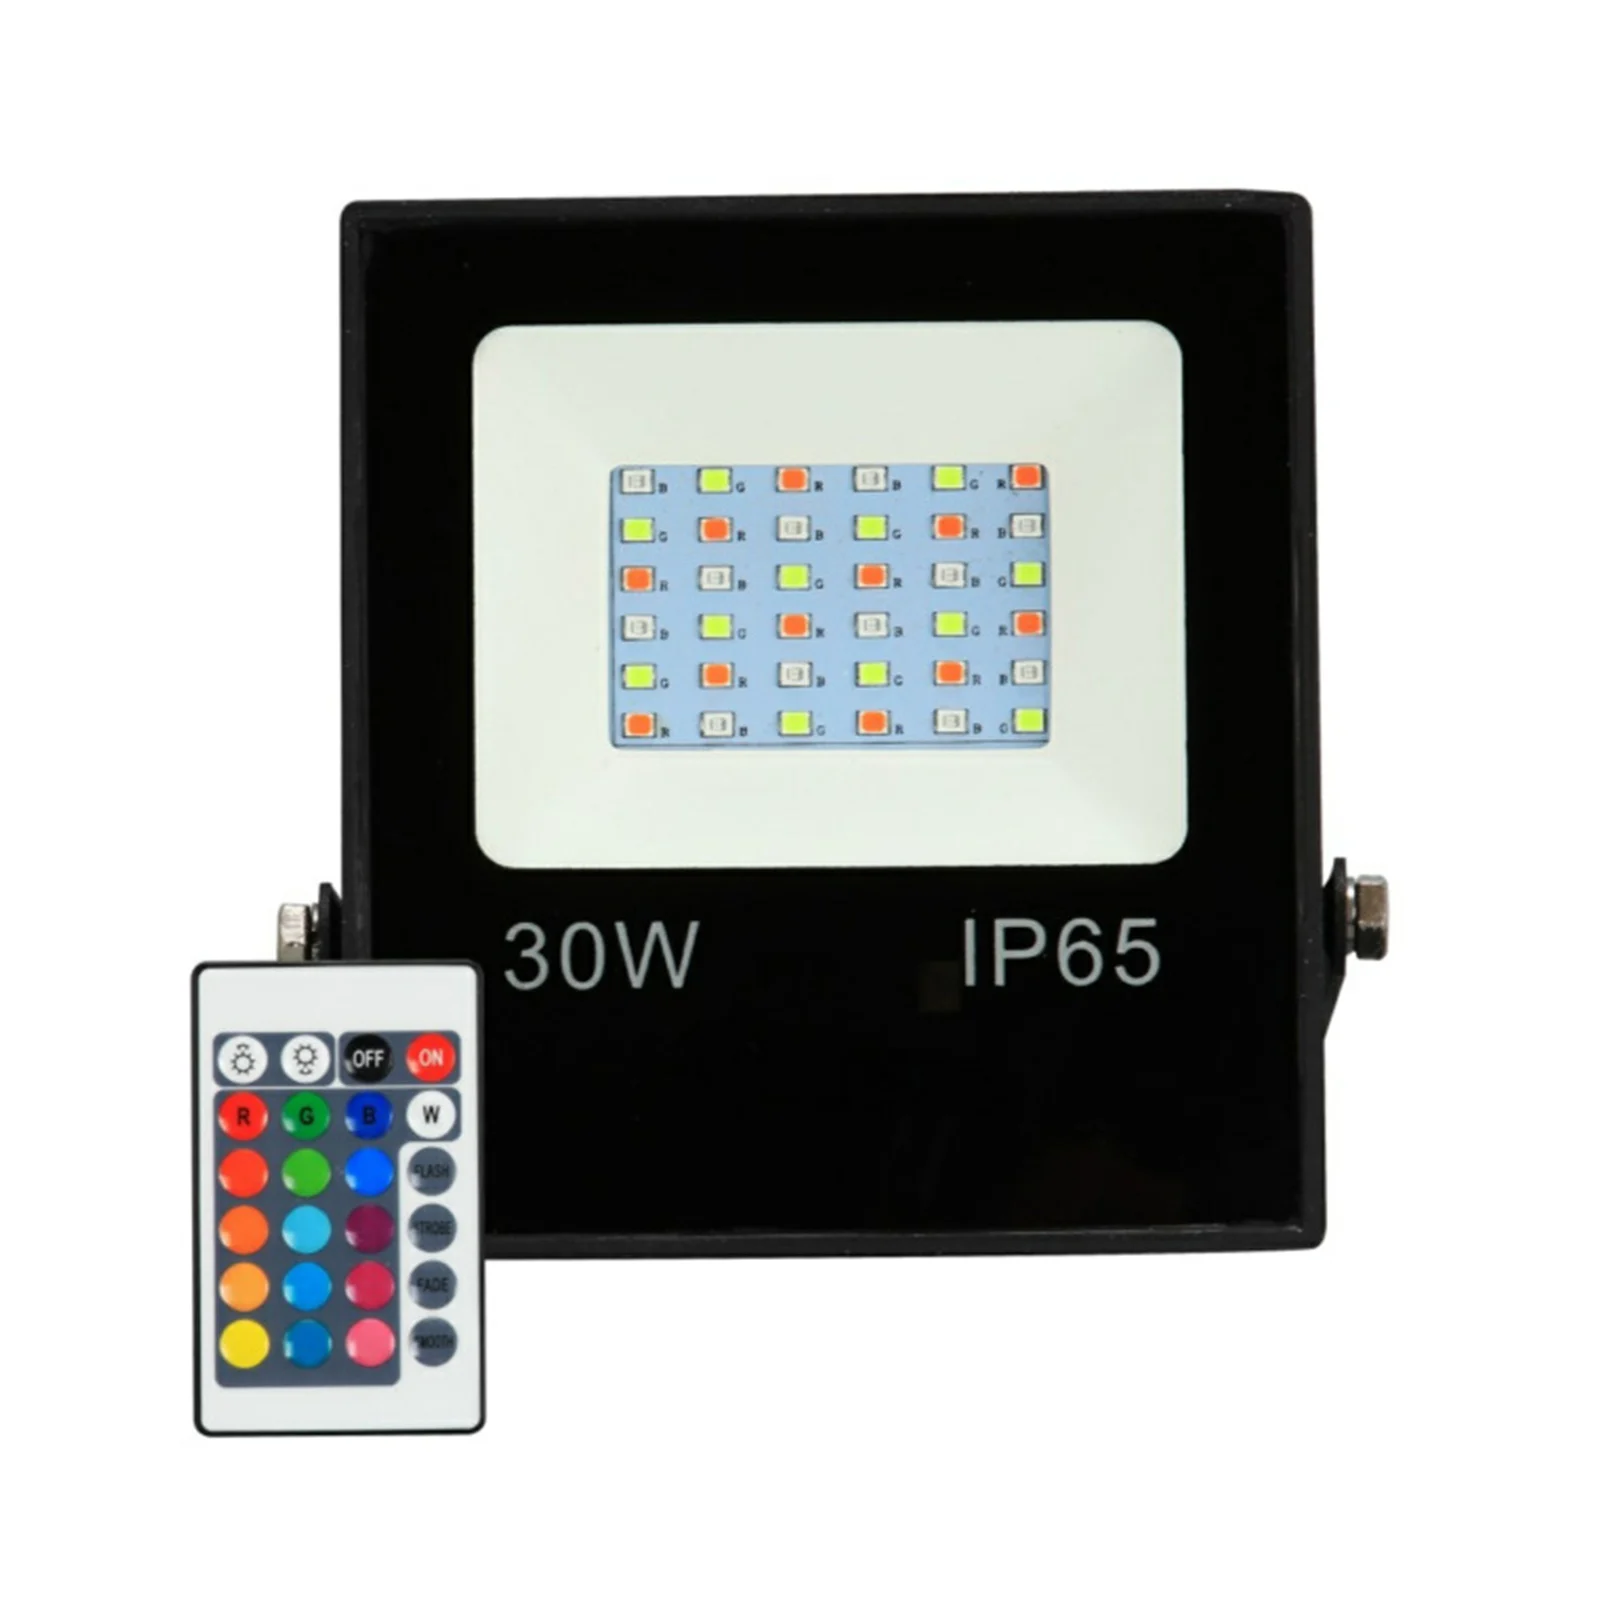 

RGB Led Floodlight Remote Control Reflector 30W Outdoor Garden Waterproof Landscape Lamp 4 Dynamic Modes AC85-265V fashionable